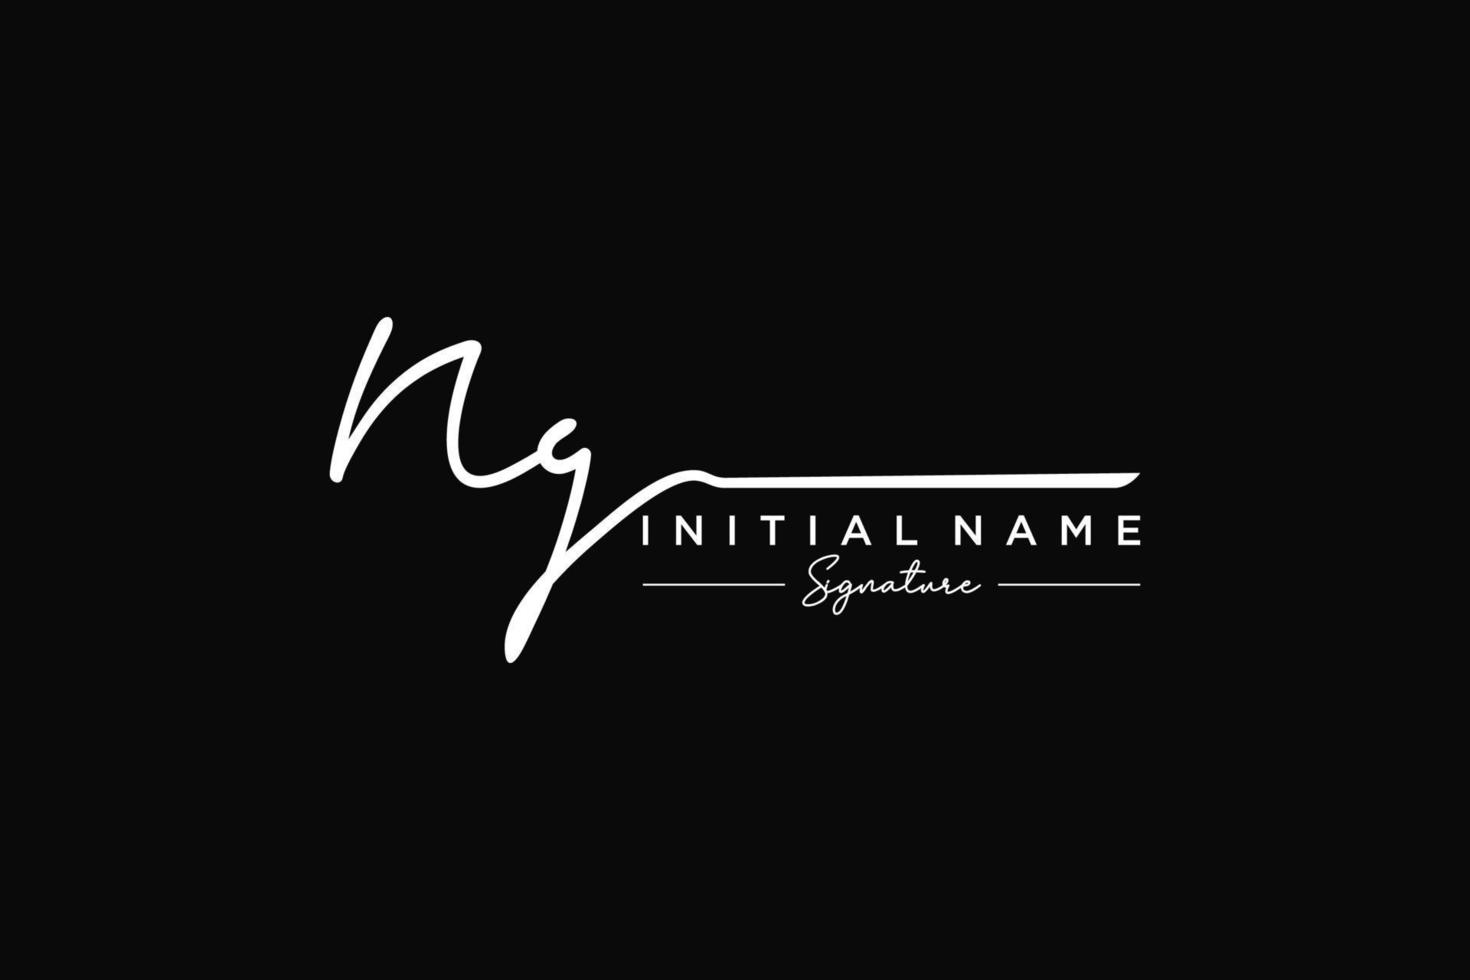 Initial NG signature logo template vector. Hand drawn Calligraphy lettering Vector illustration.